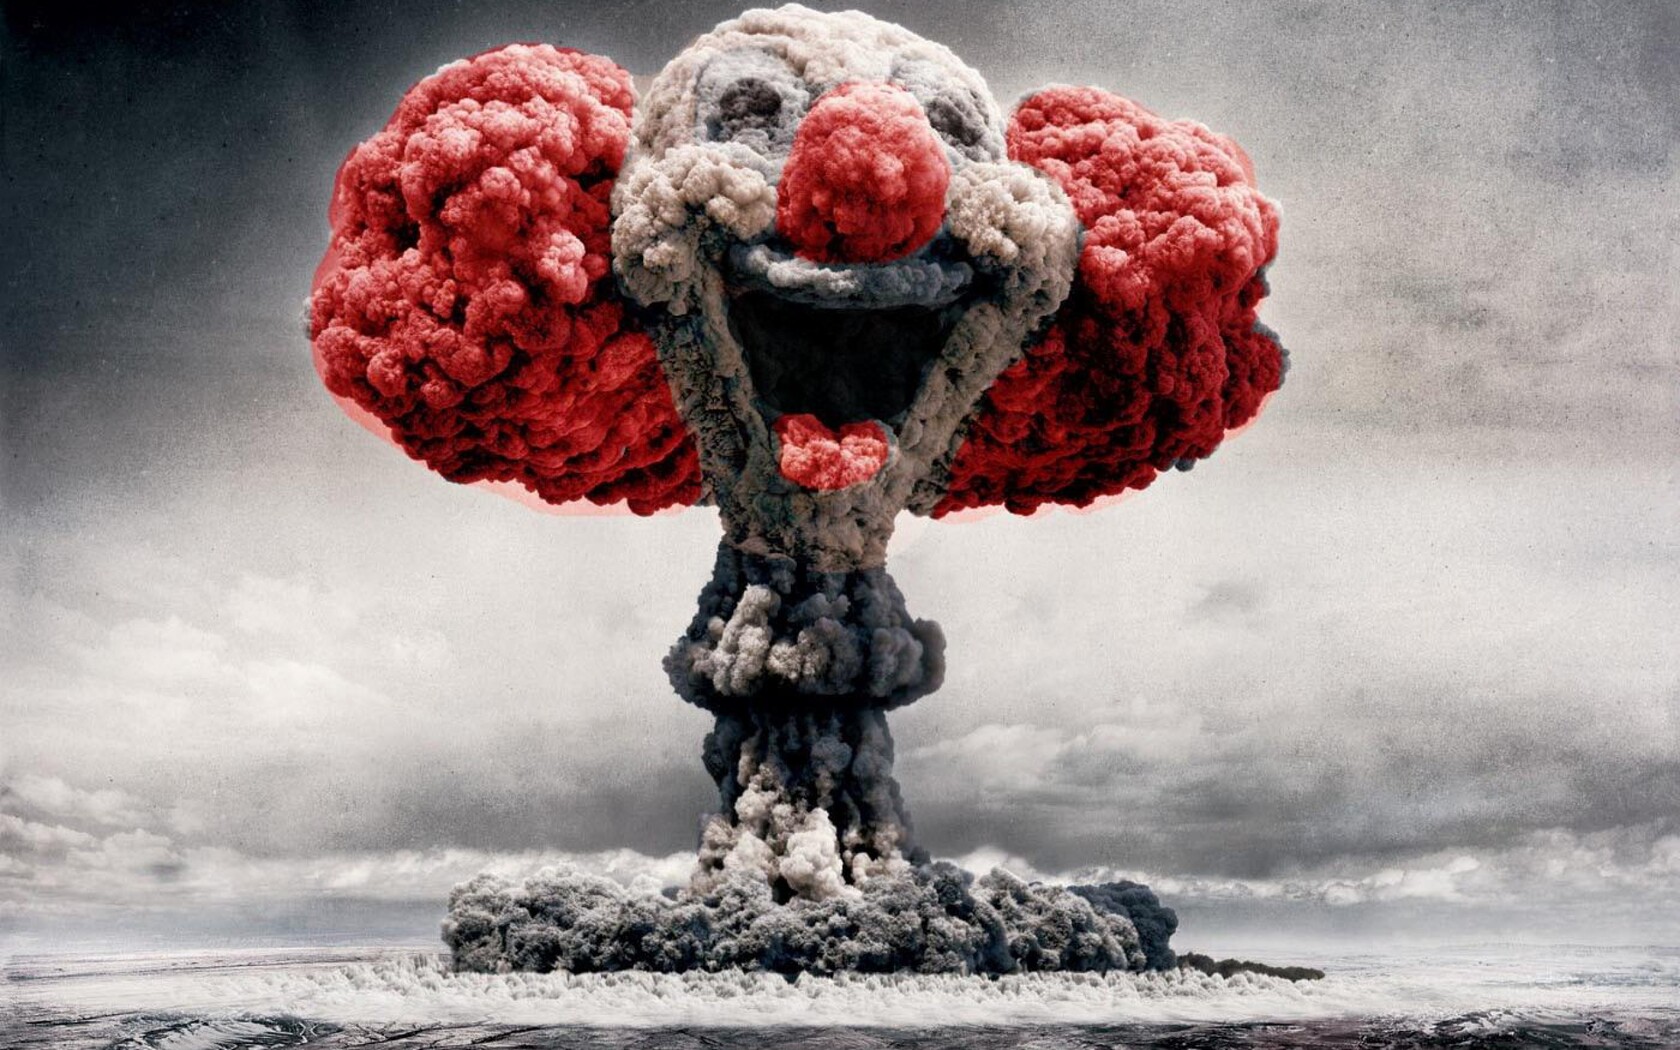 A nuclear explosion with a clown face on it - Clown